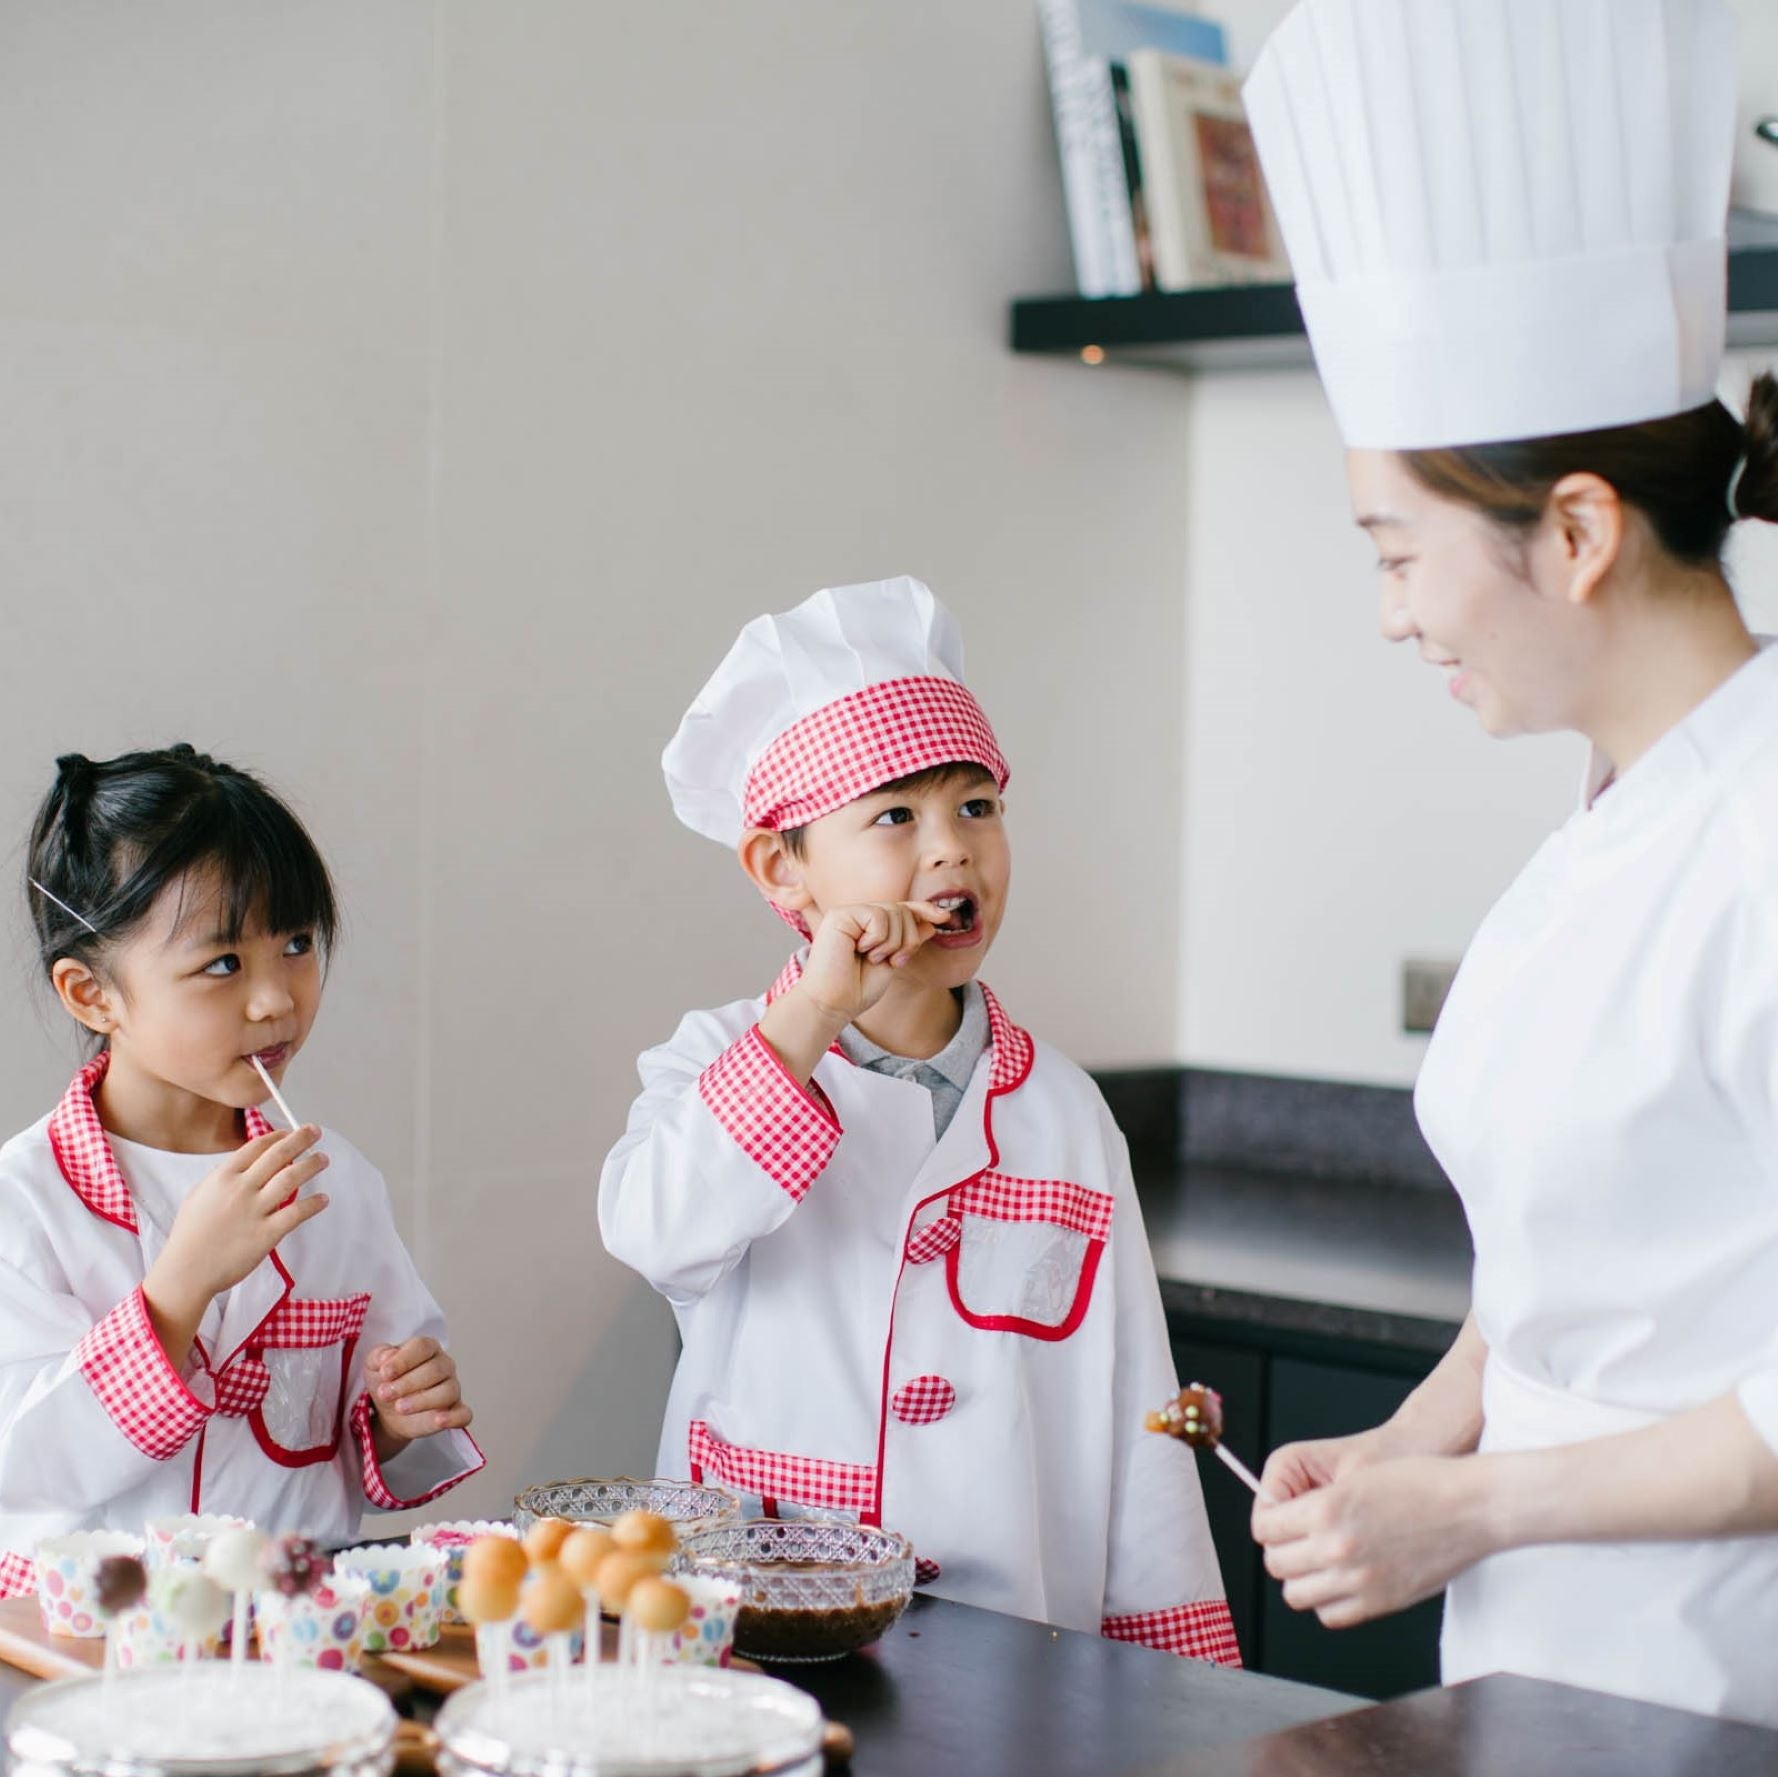 Cookie-making for Young Bakers